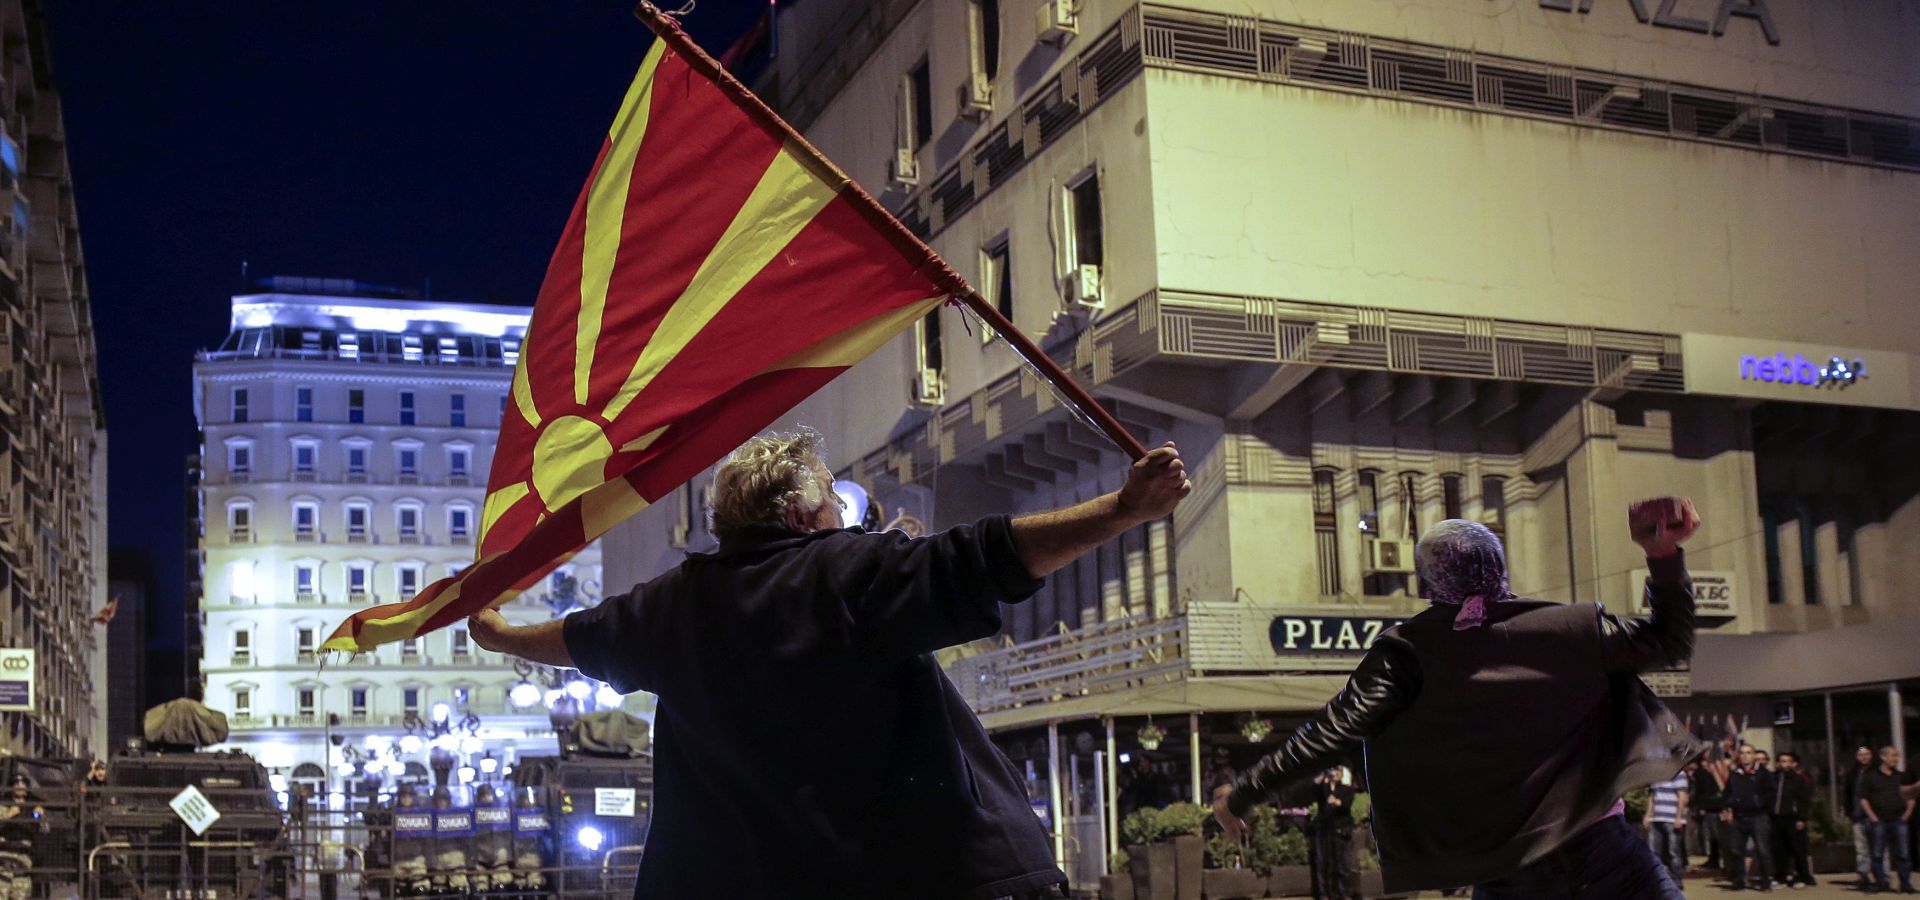 epa05259051 Protestors wave Macedonian flag and hits with stoune to the cordon of special police forces during the protest against Macedonian President Gjorge Ivanov's decision on wiretapping amnesty, in Skopje, Macedonia, 14 April 2016. Ivanov decided to abolish all judicial cases related to the big wire-tapping scandal that brought the country to early general elections scheduled for 05 June. The crisis started in 2015 when opposition SDSM started to publish illegally recorded wire-tapped phone conversations of the highest Governmental officials claiming they show financial crime and eventual evidences of electoral frauds of the ruling conservative VMRO-DPMNE party of then PM Gruevski. Gruevski denied everything saying 'foreign intelligence services' are trying to topple his Government he was administrating from 2006.  EPA/VALDRIN XHEMAJ